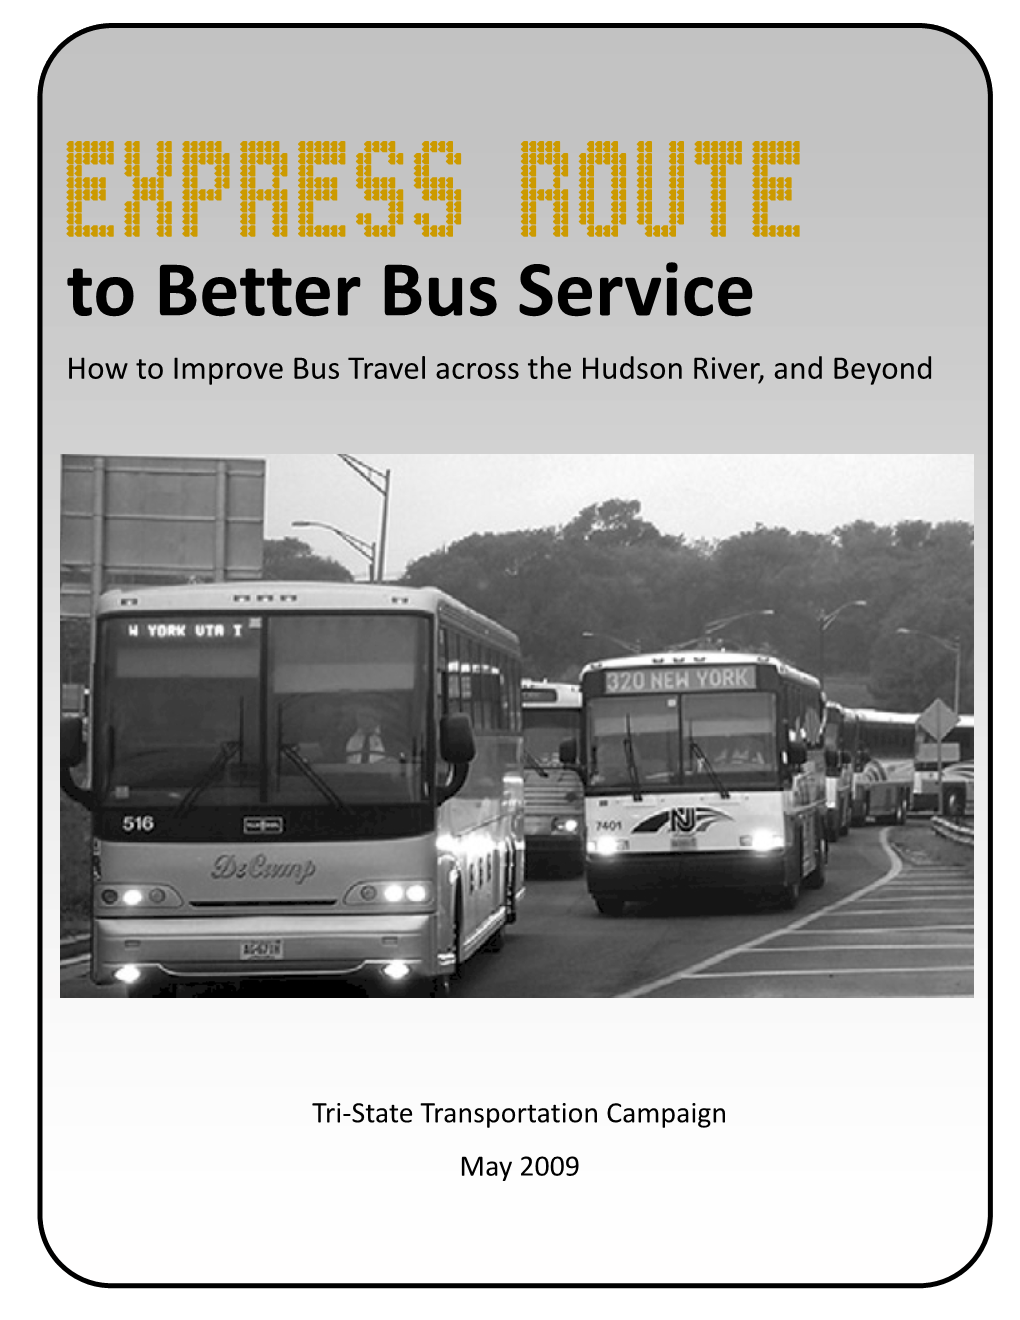 To Better Bus Service How to Improve Bus Travel Across the Hudson River, and Beyond